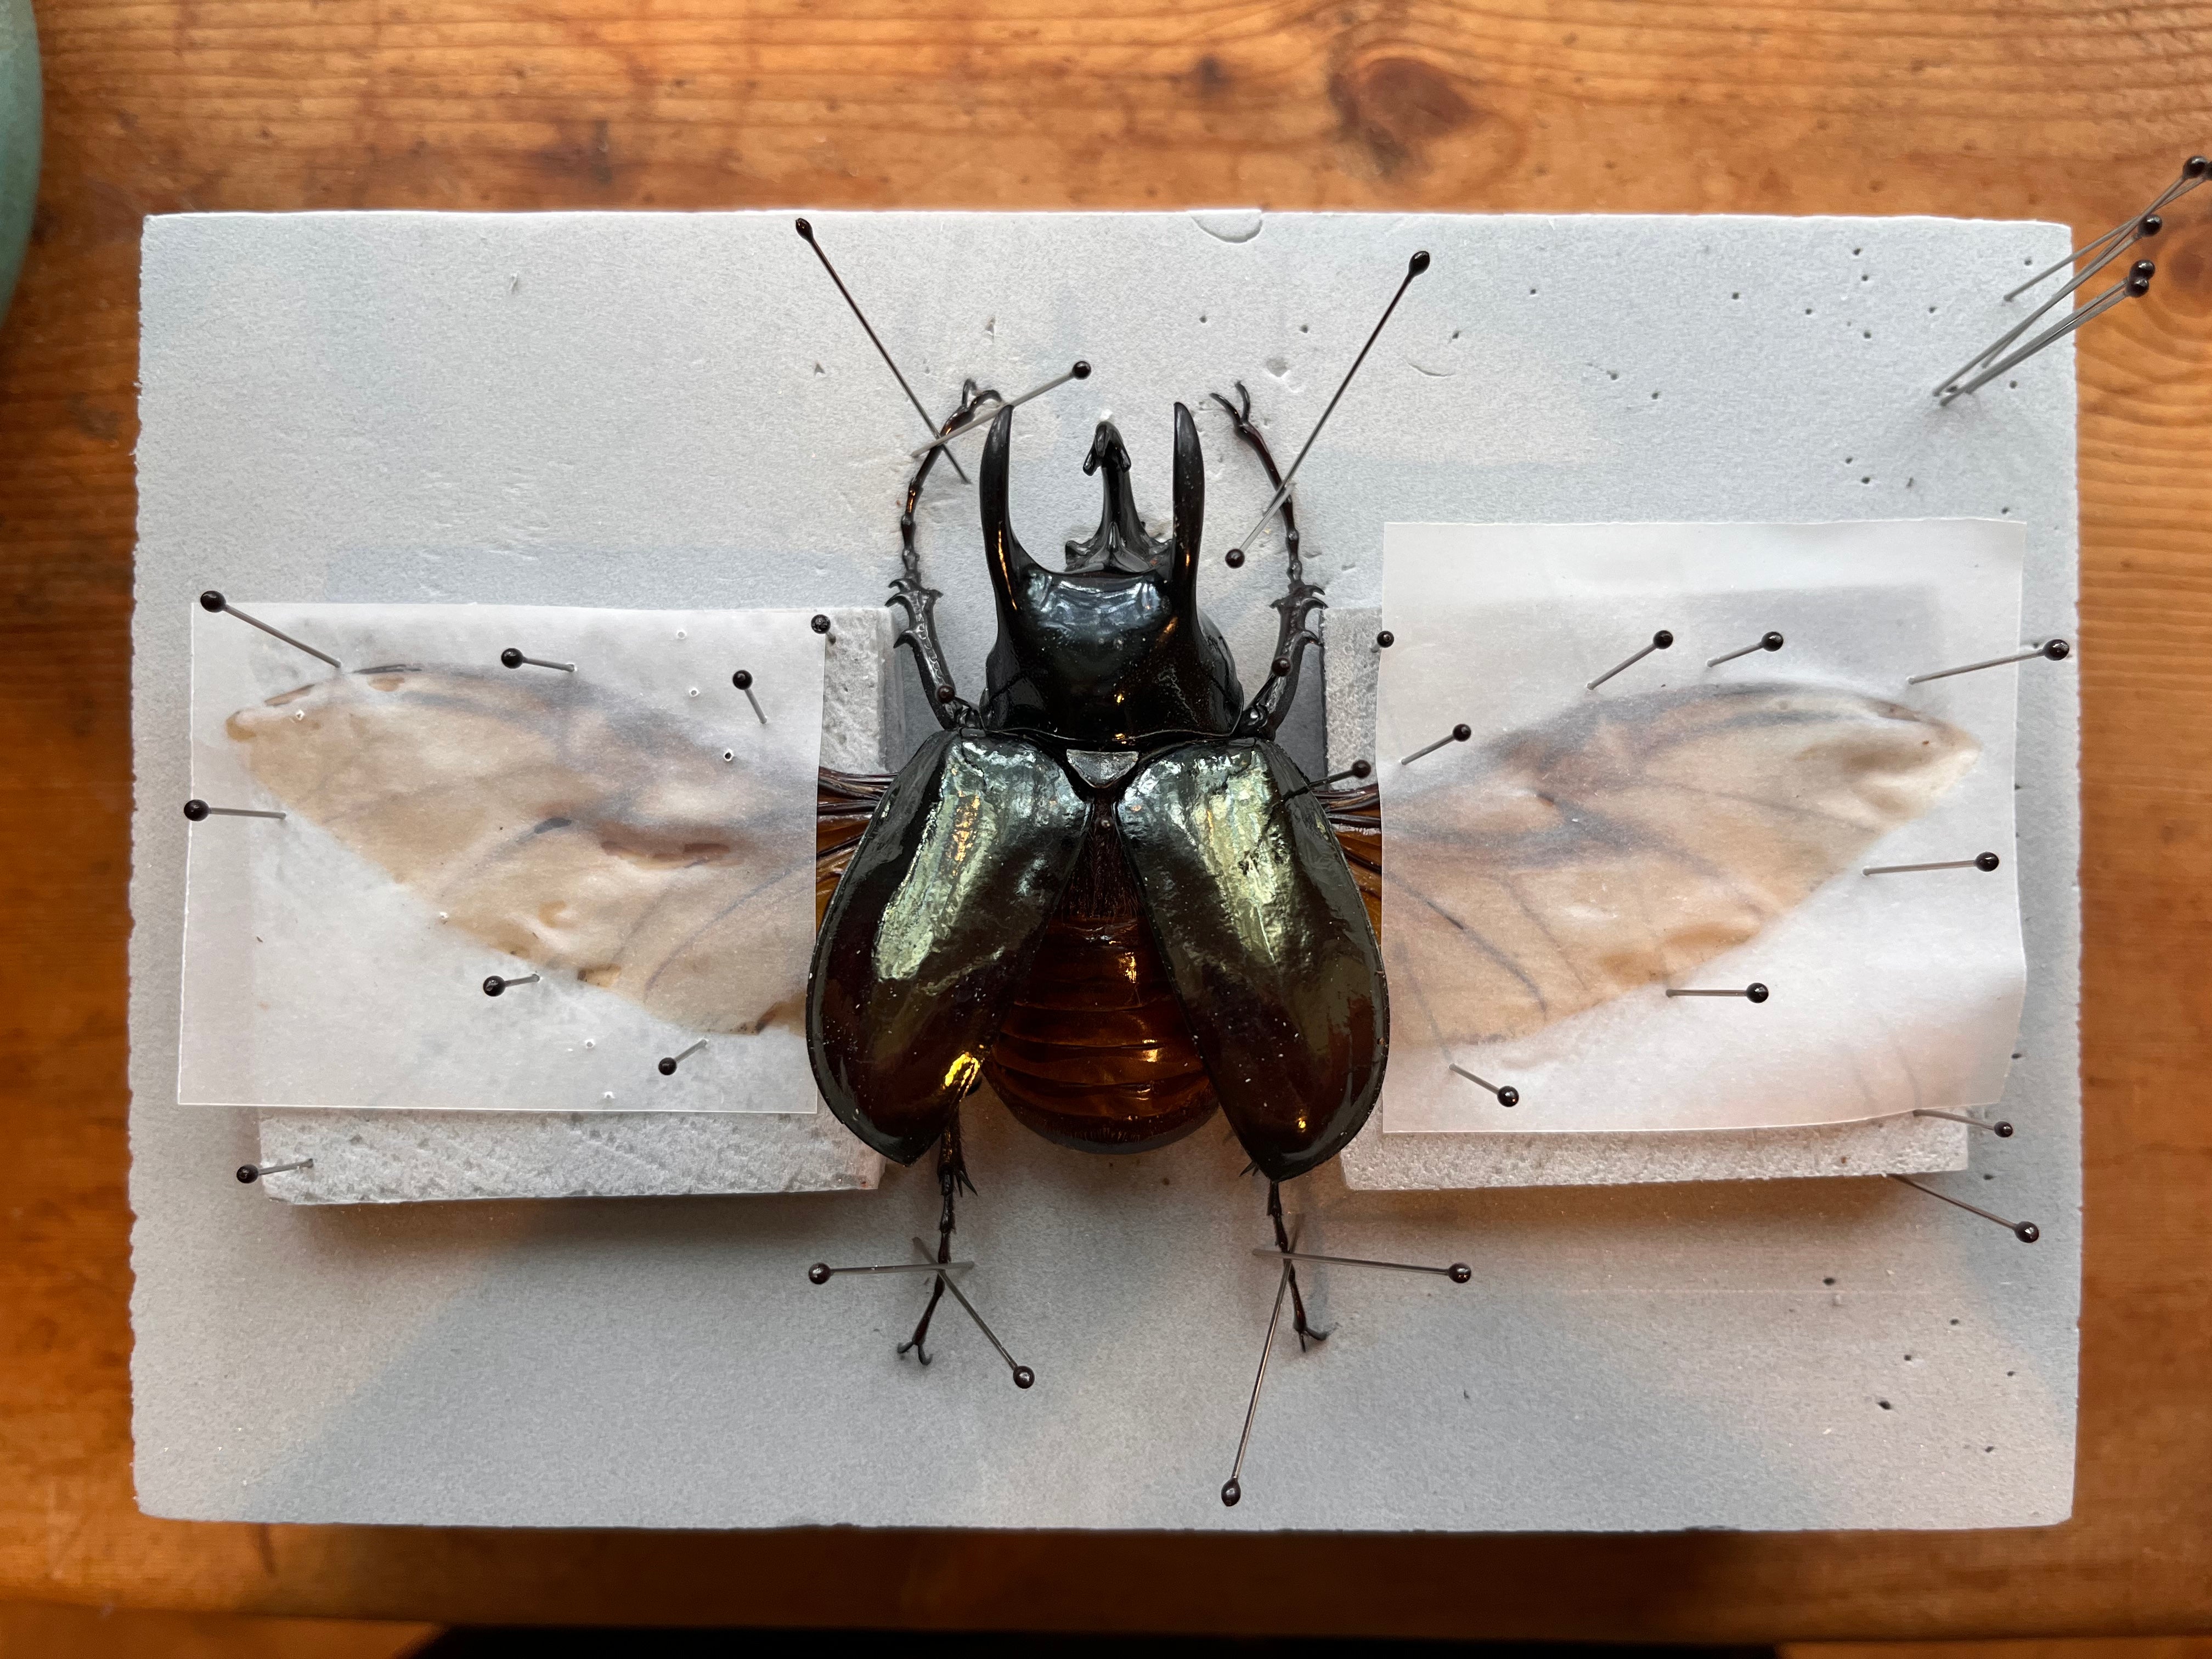 Complete Beetle Mounting Kit with Insect Spreading Board